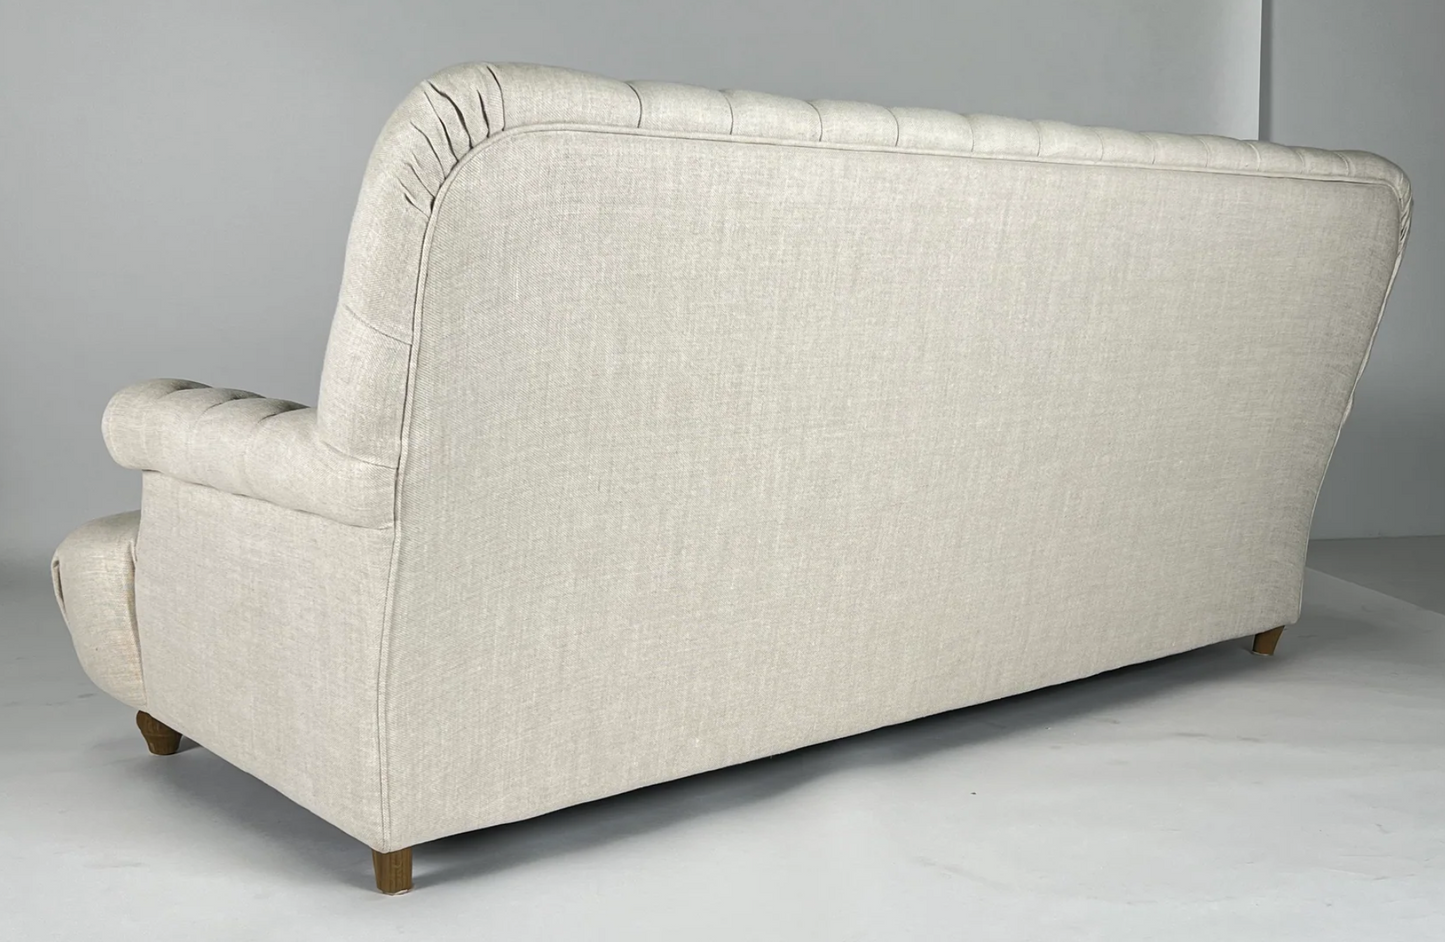 Cream linen tufted sofa, rolled arm and deep seat